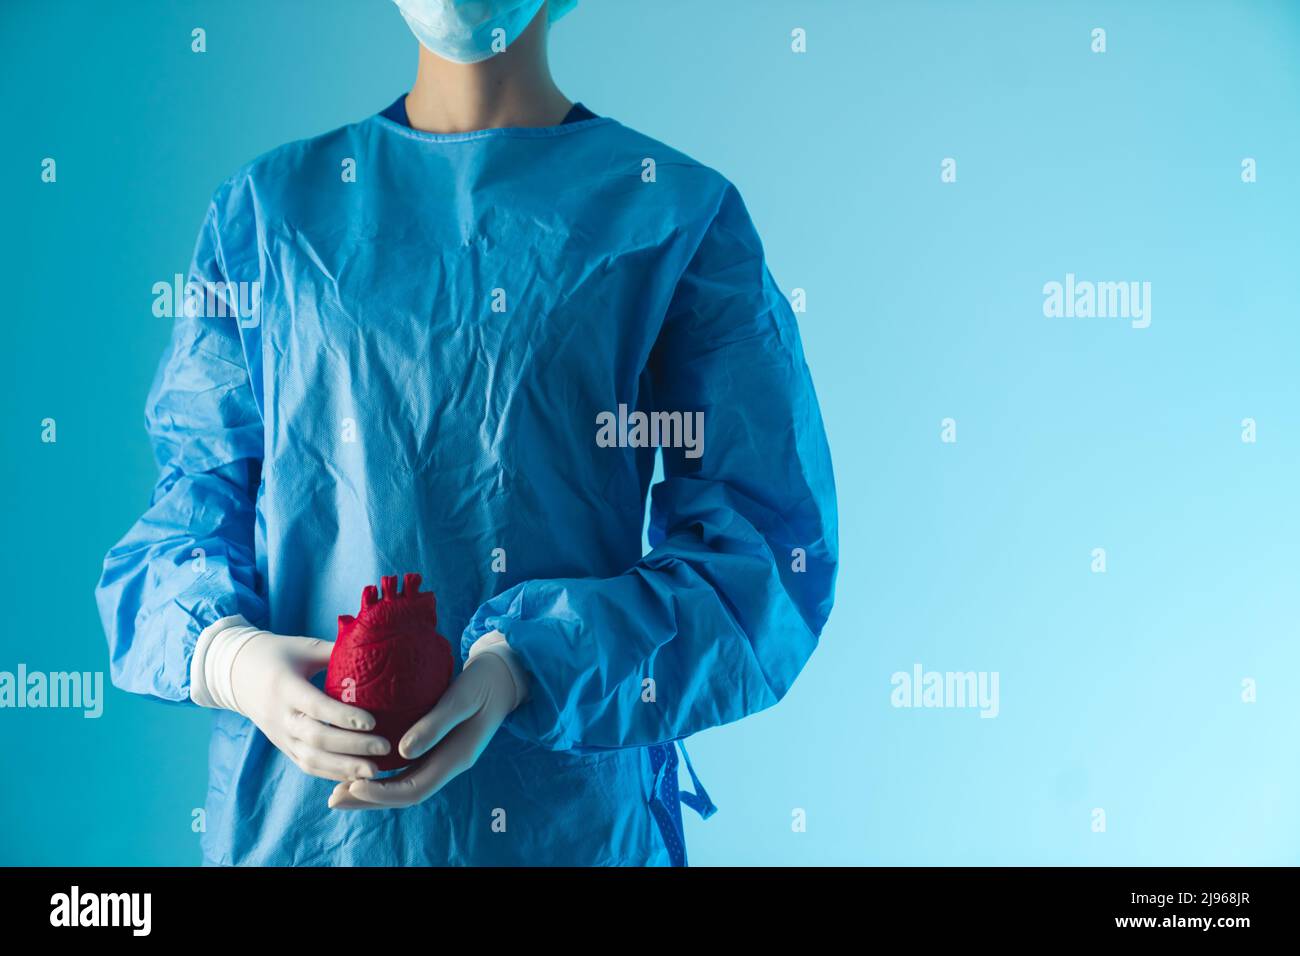 Masked unrecognizable doctor wearing surgical scrubs and gloves holding a fake red human heart. Blue background. Medical concept. High quality photo Stock Photo